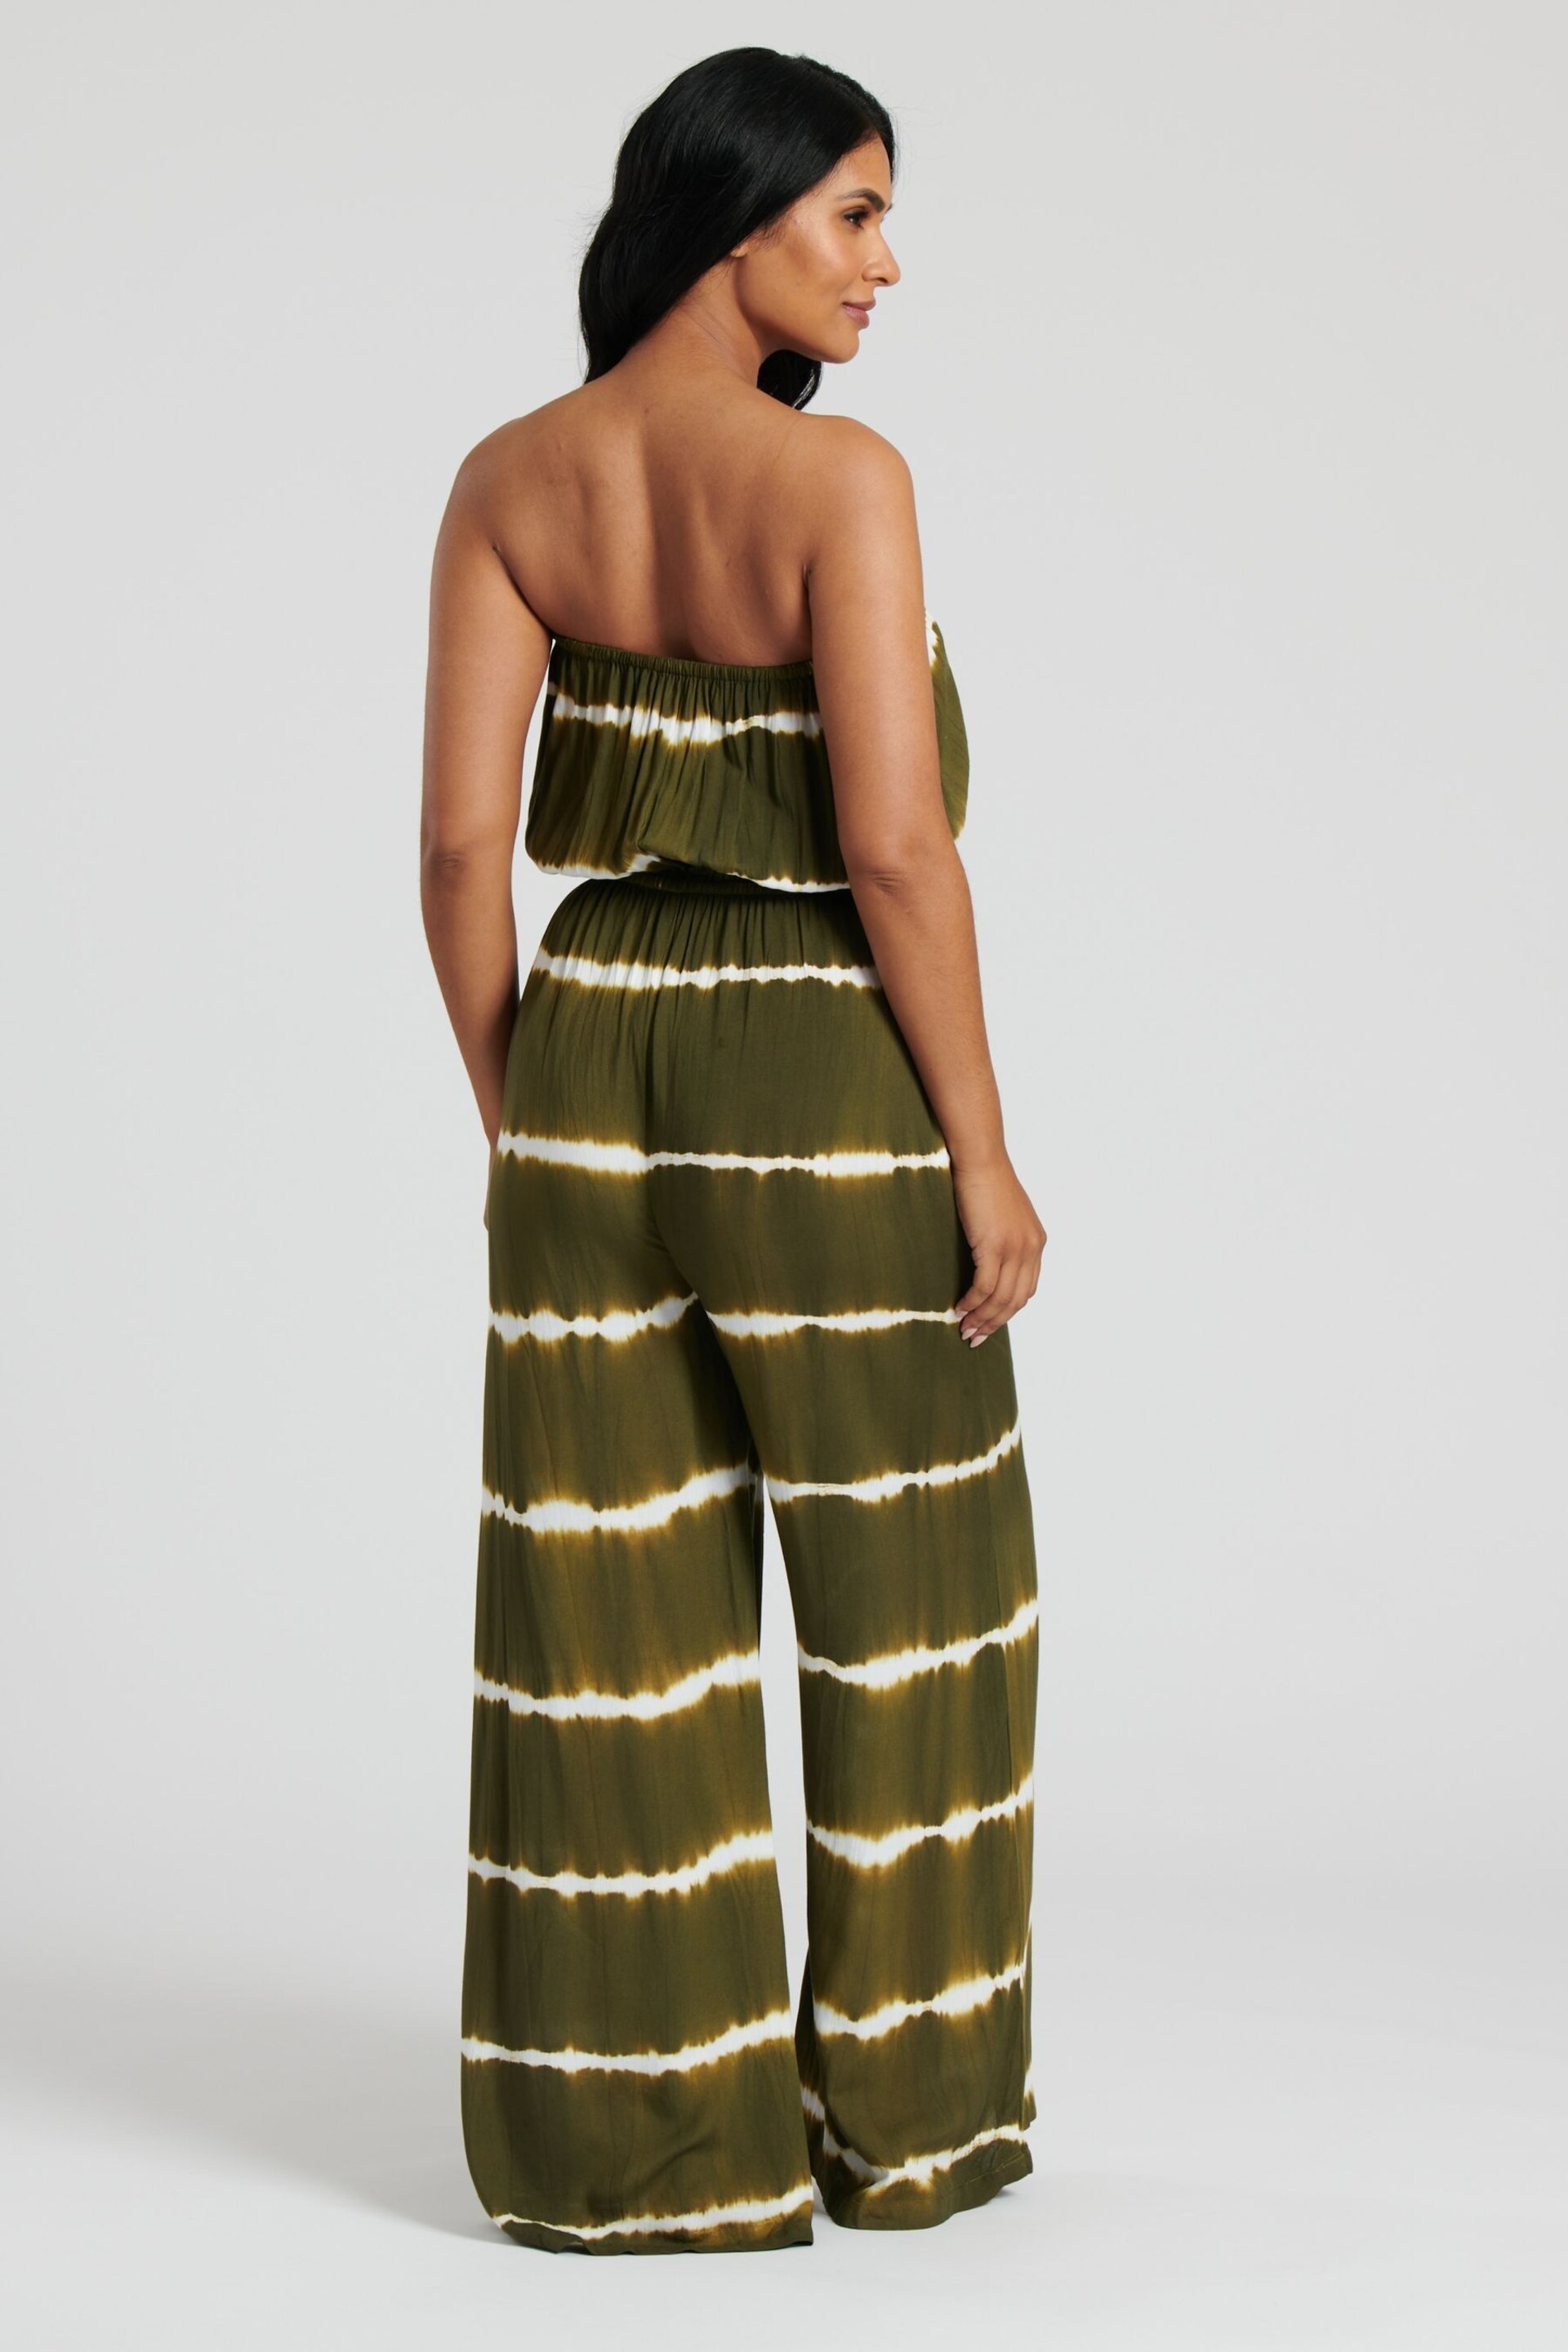 South Beach Green Tie Dye Strapless Jumpsuit - Image 2 of 5